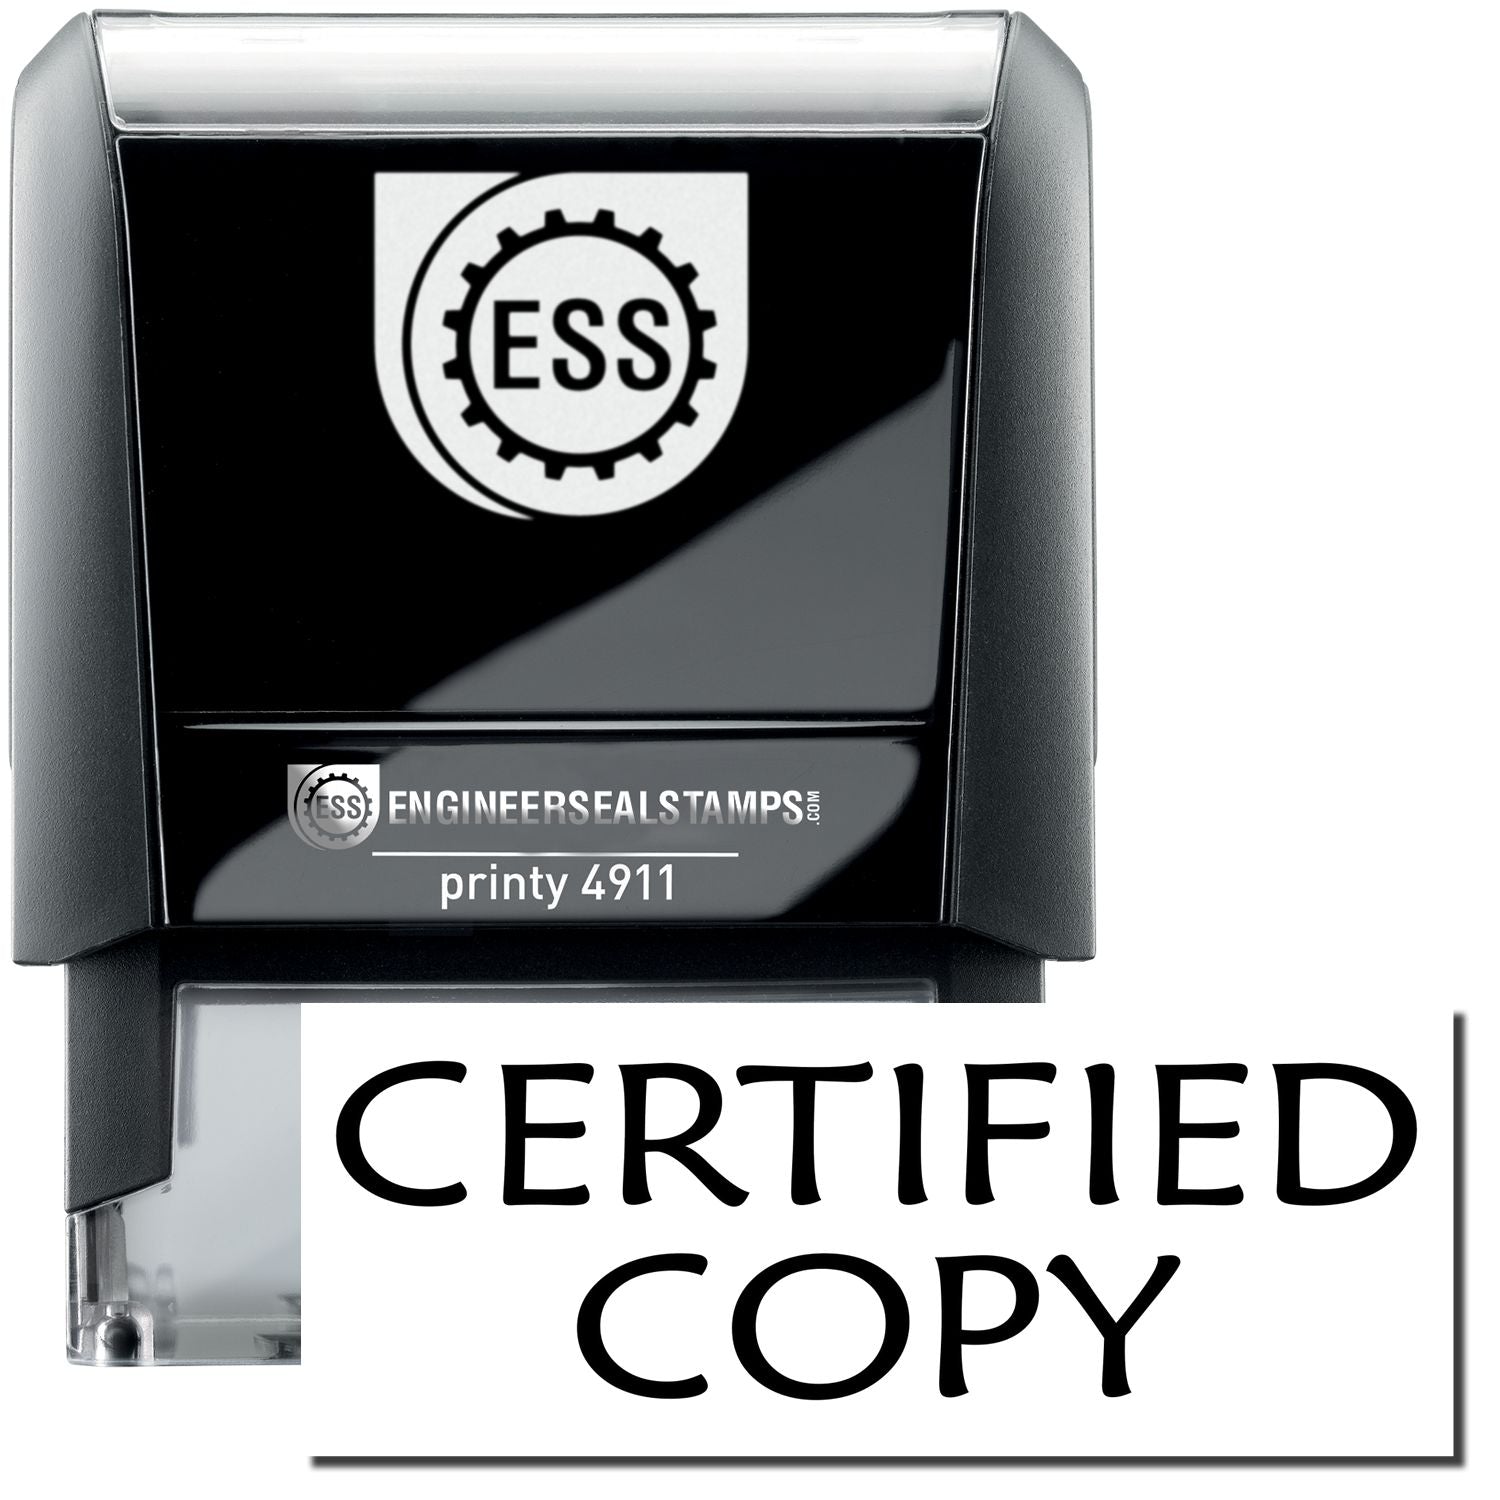 A self-inking stamp with a stamped image showing how the text "CERTIFIED COPY" is displayed after stamping.